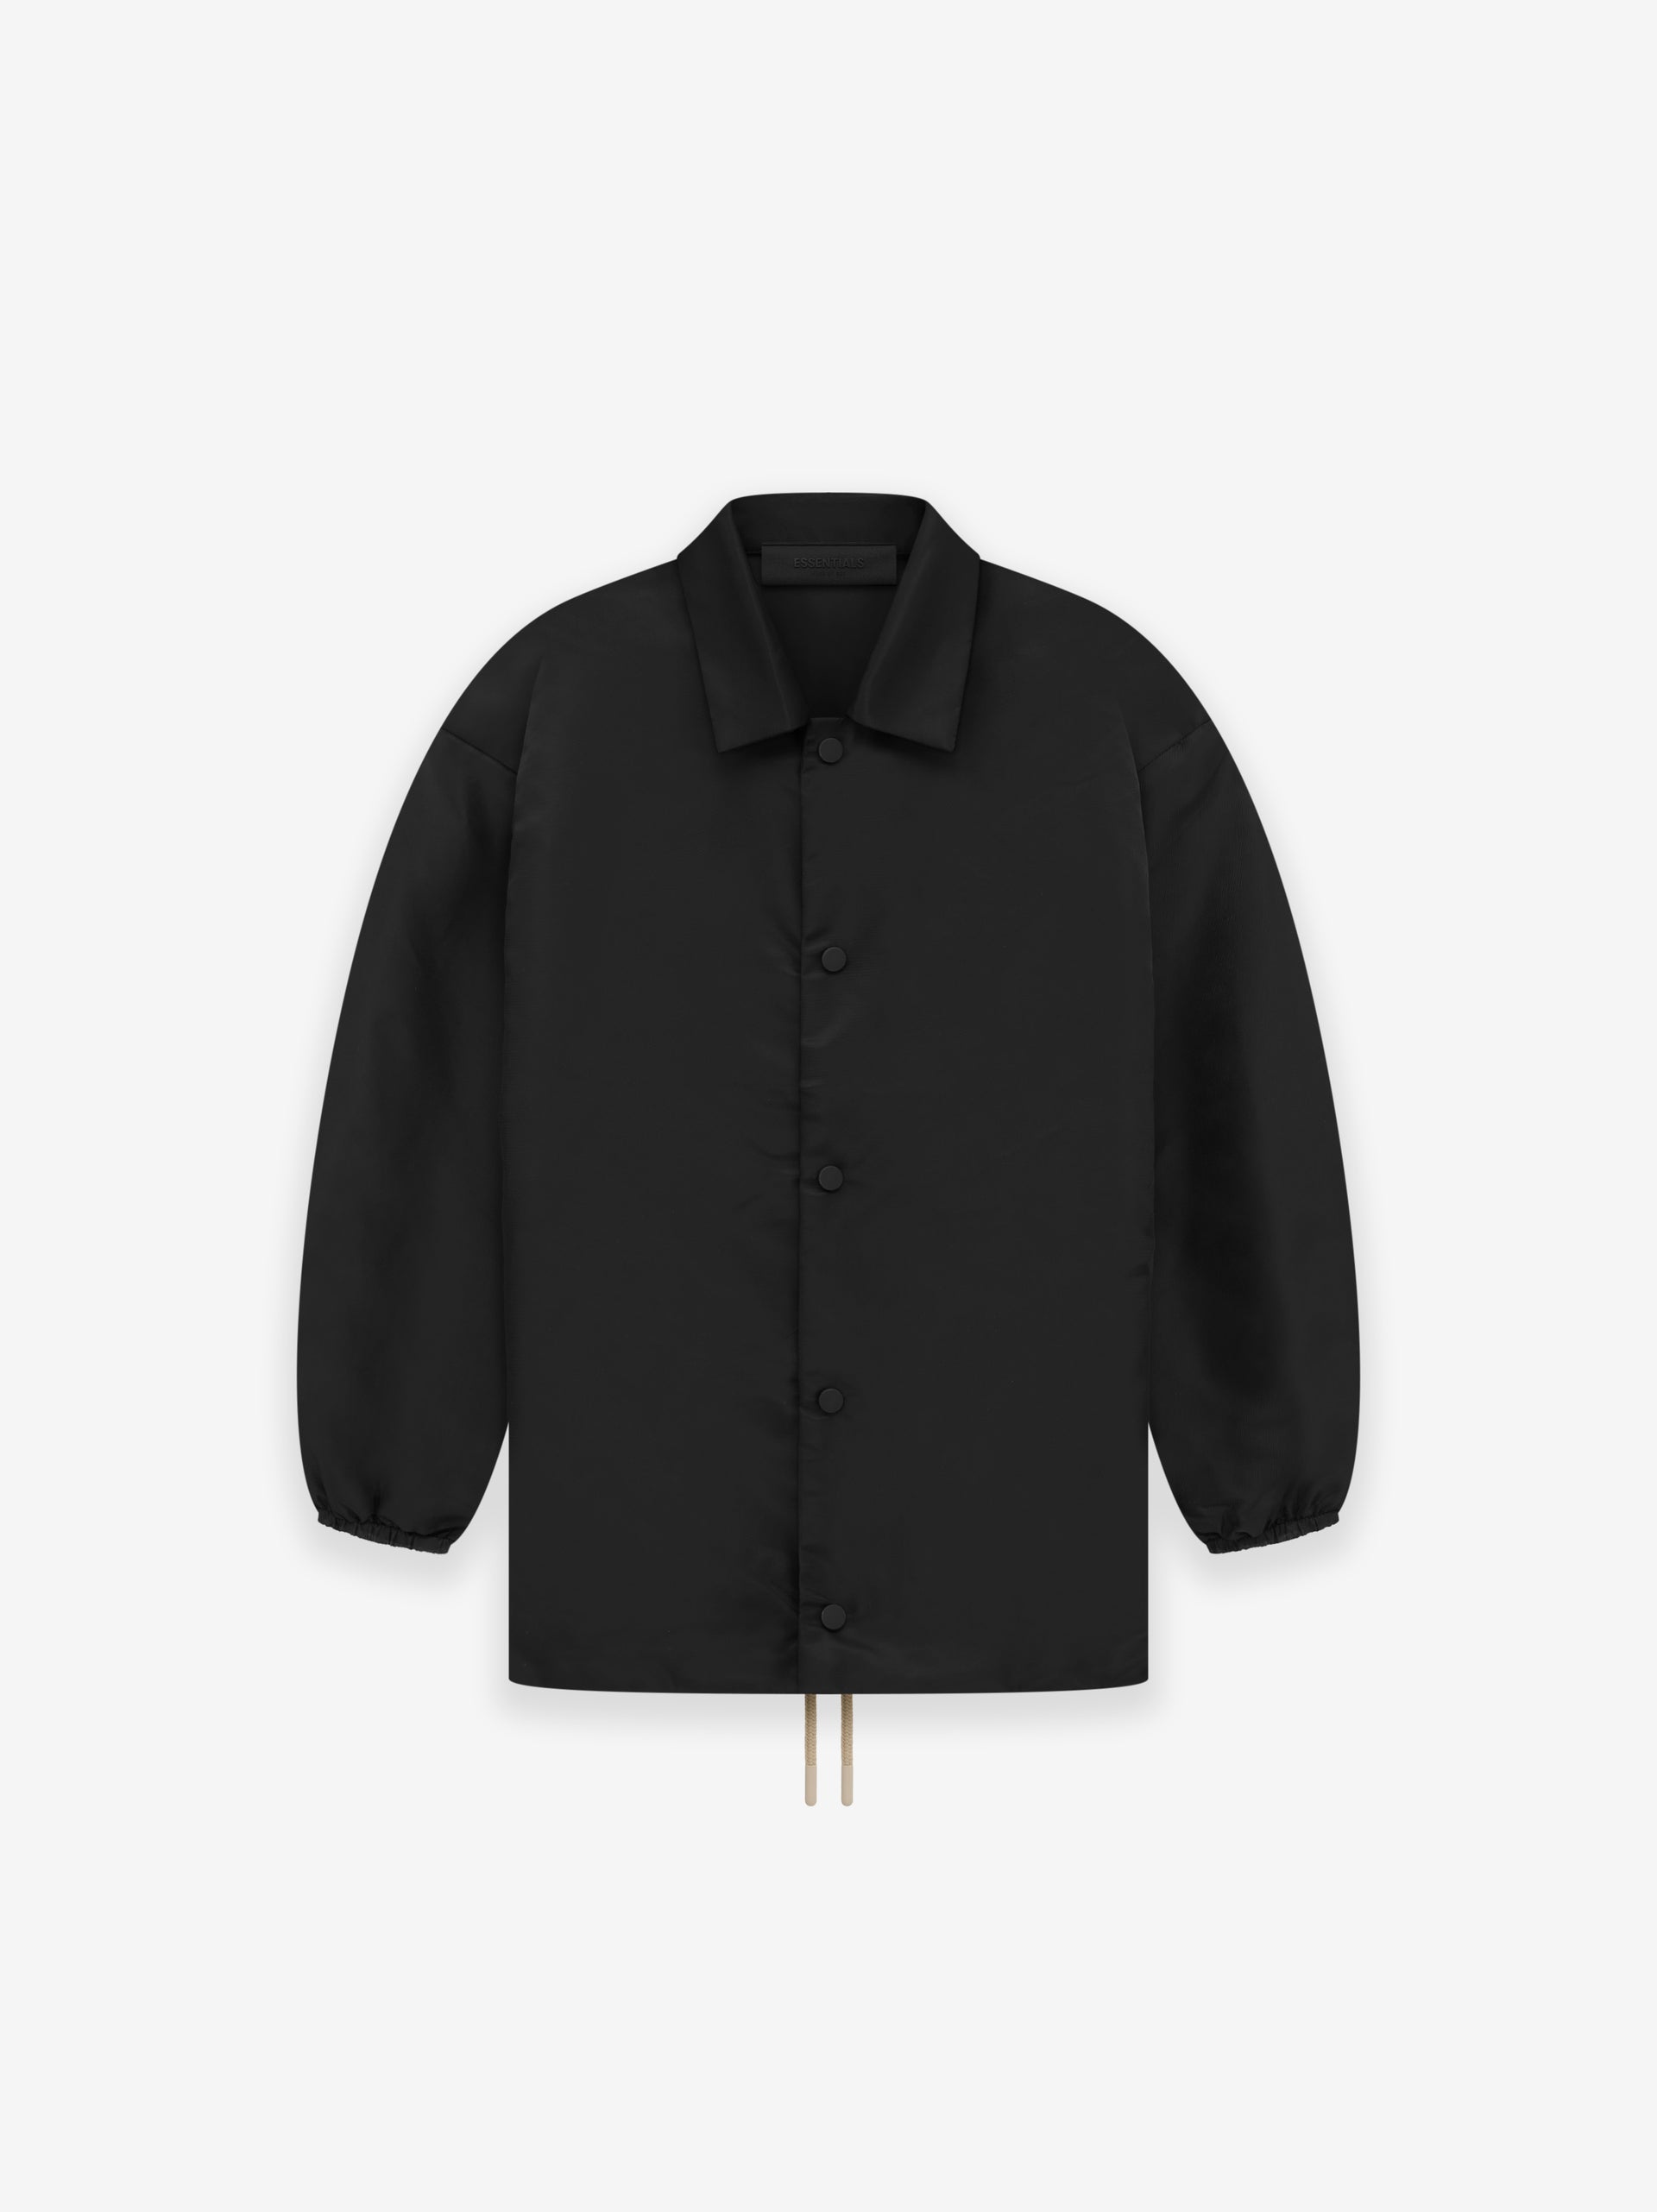 ESSENTIALS Coaches Jacket in Jet Black | Fear of God